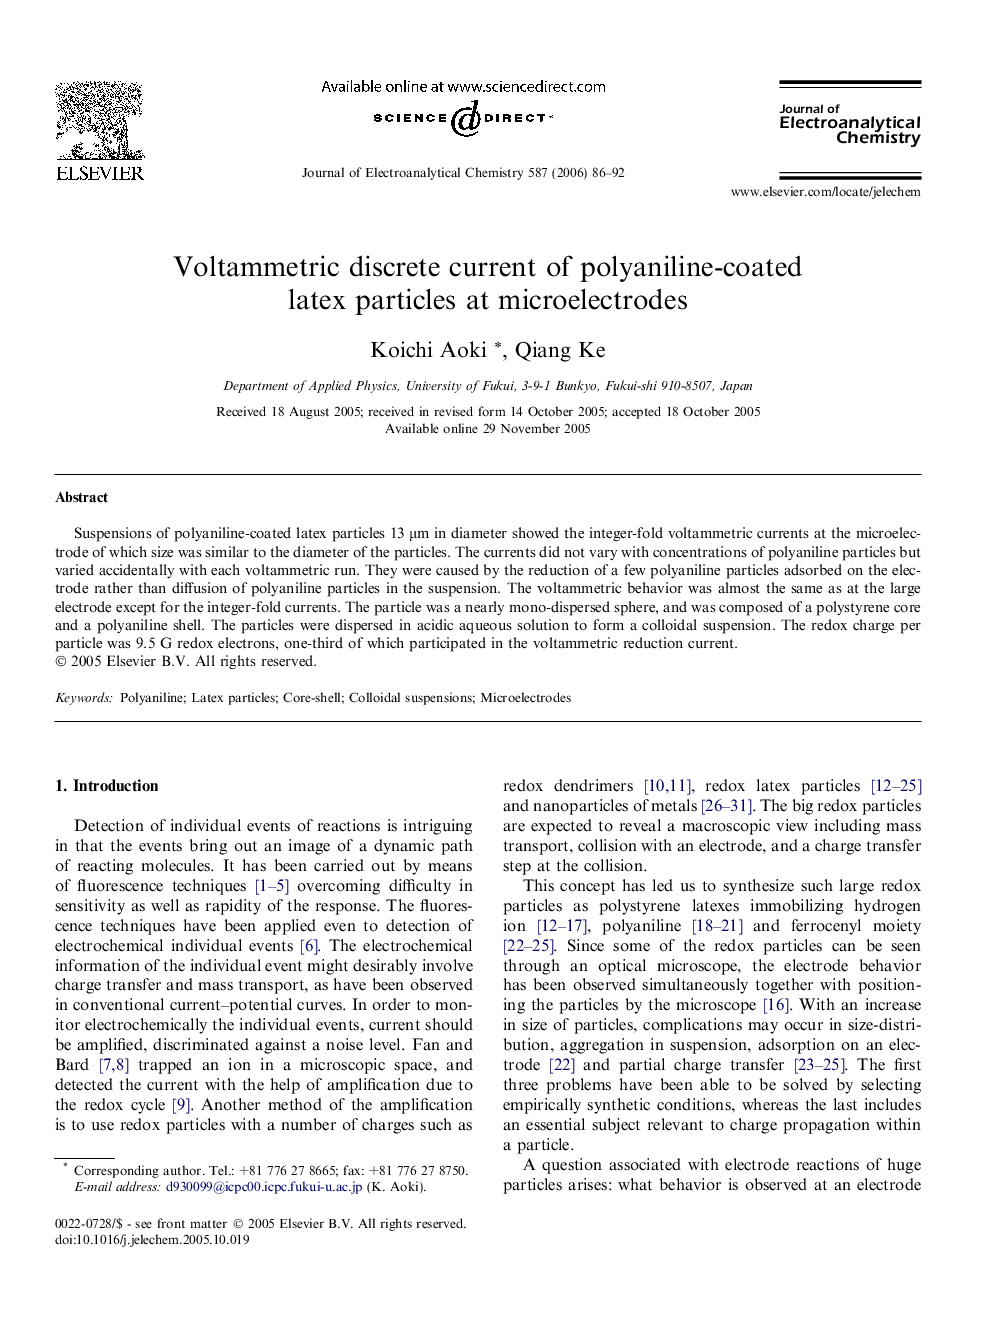 Voltammetric discrete current of polyaniline-coated latex particles at microelectrodes